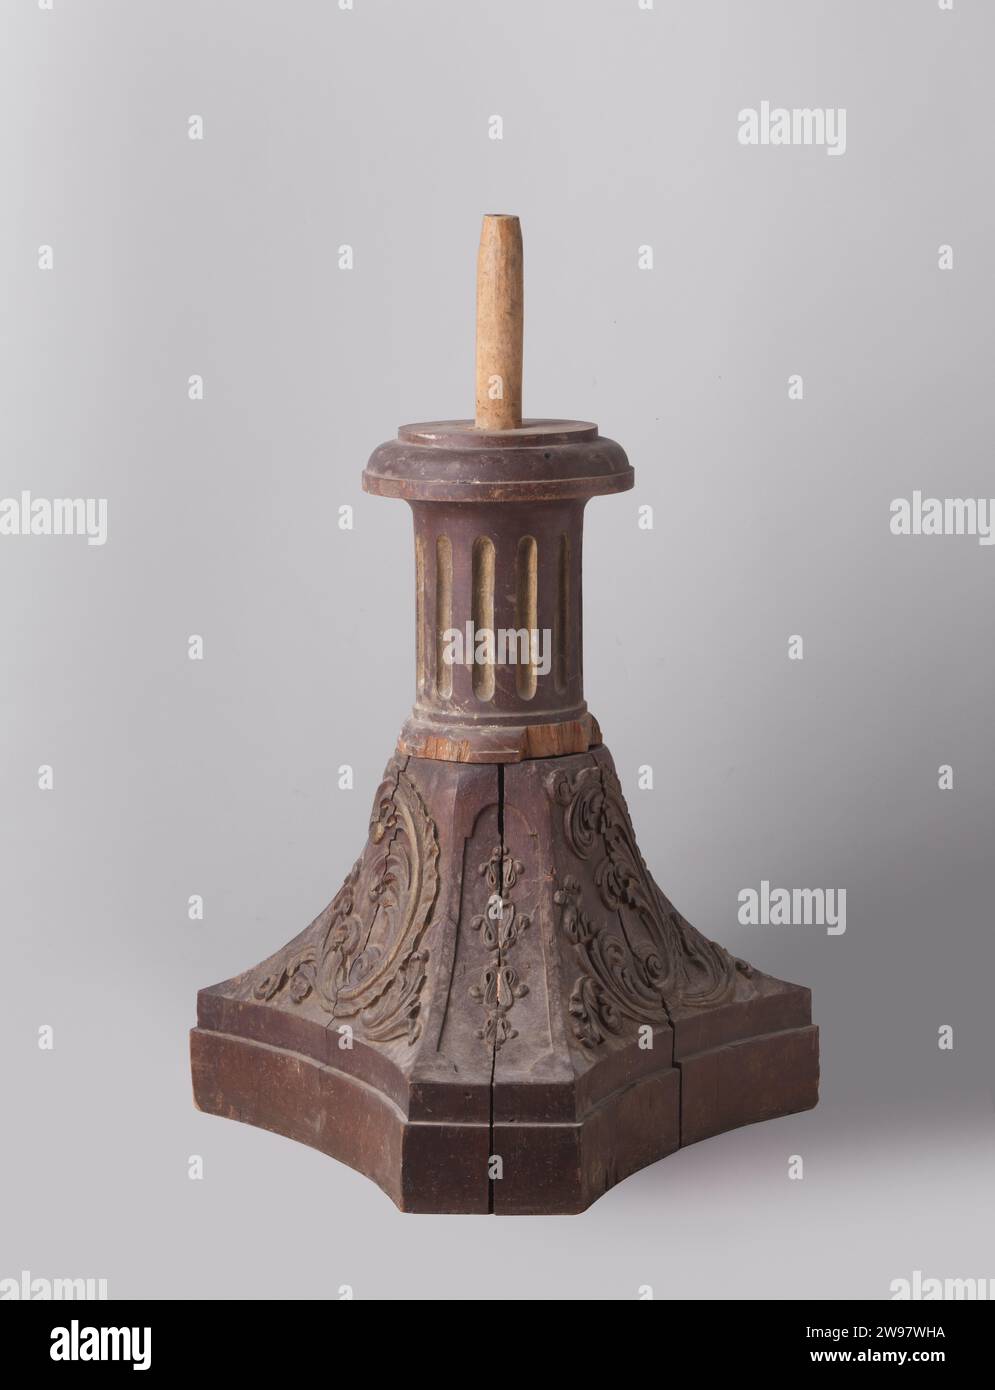 Pedestal, anonymous, c. 1900 - c. 1910  Pedim with eight corners, decorated with praise. Netherlands wood (plant material). iron (metal)   Netherlands Stock Photo